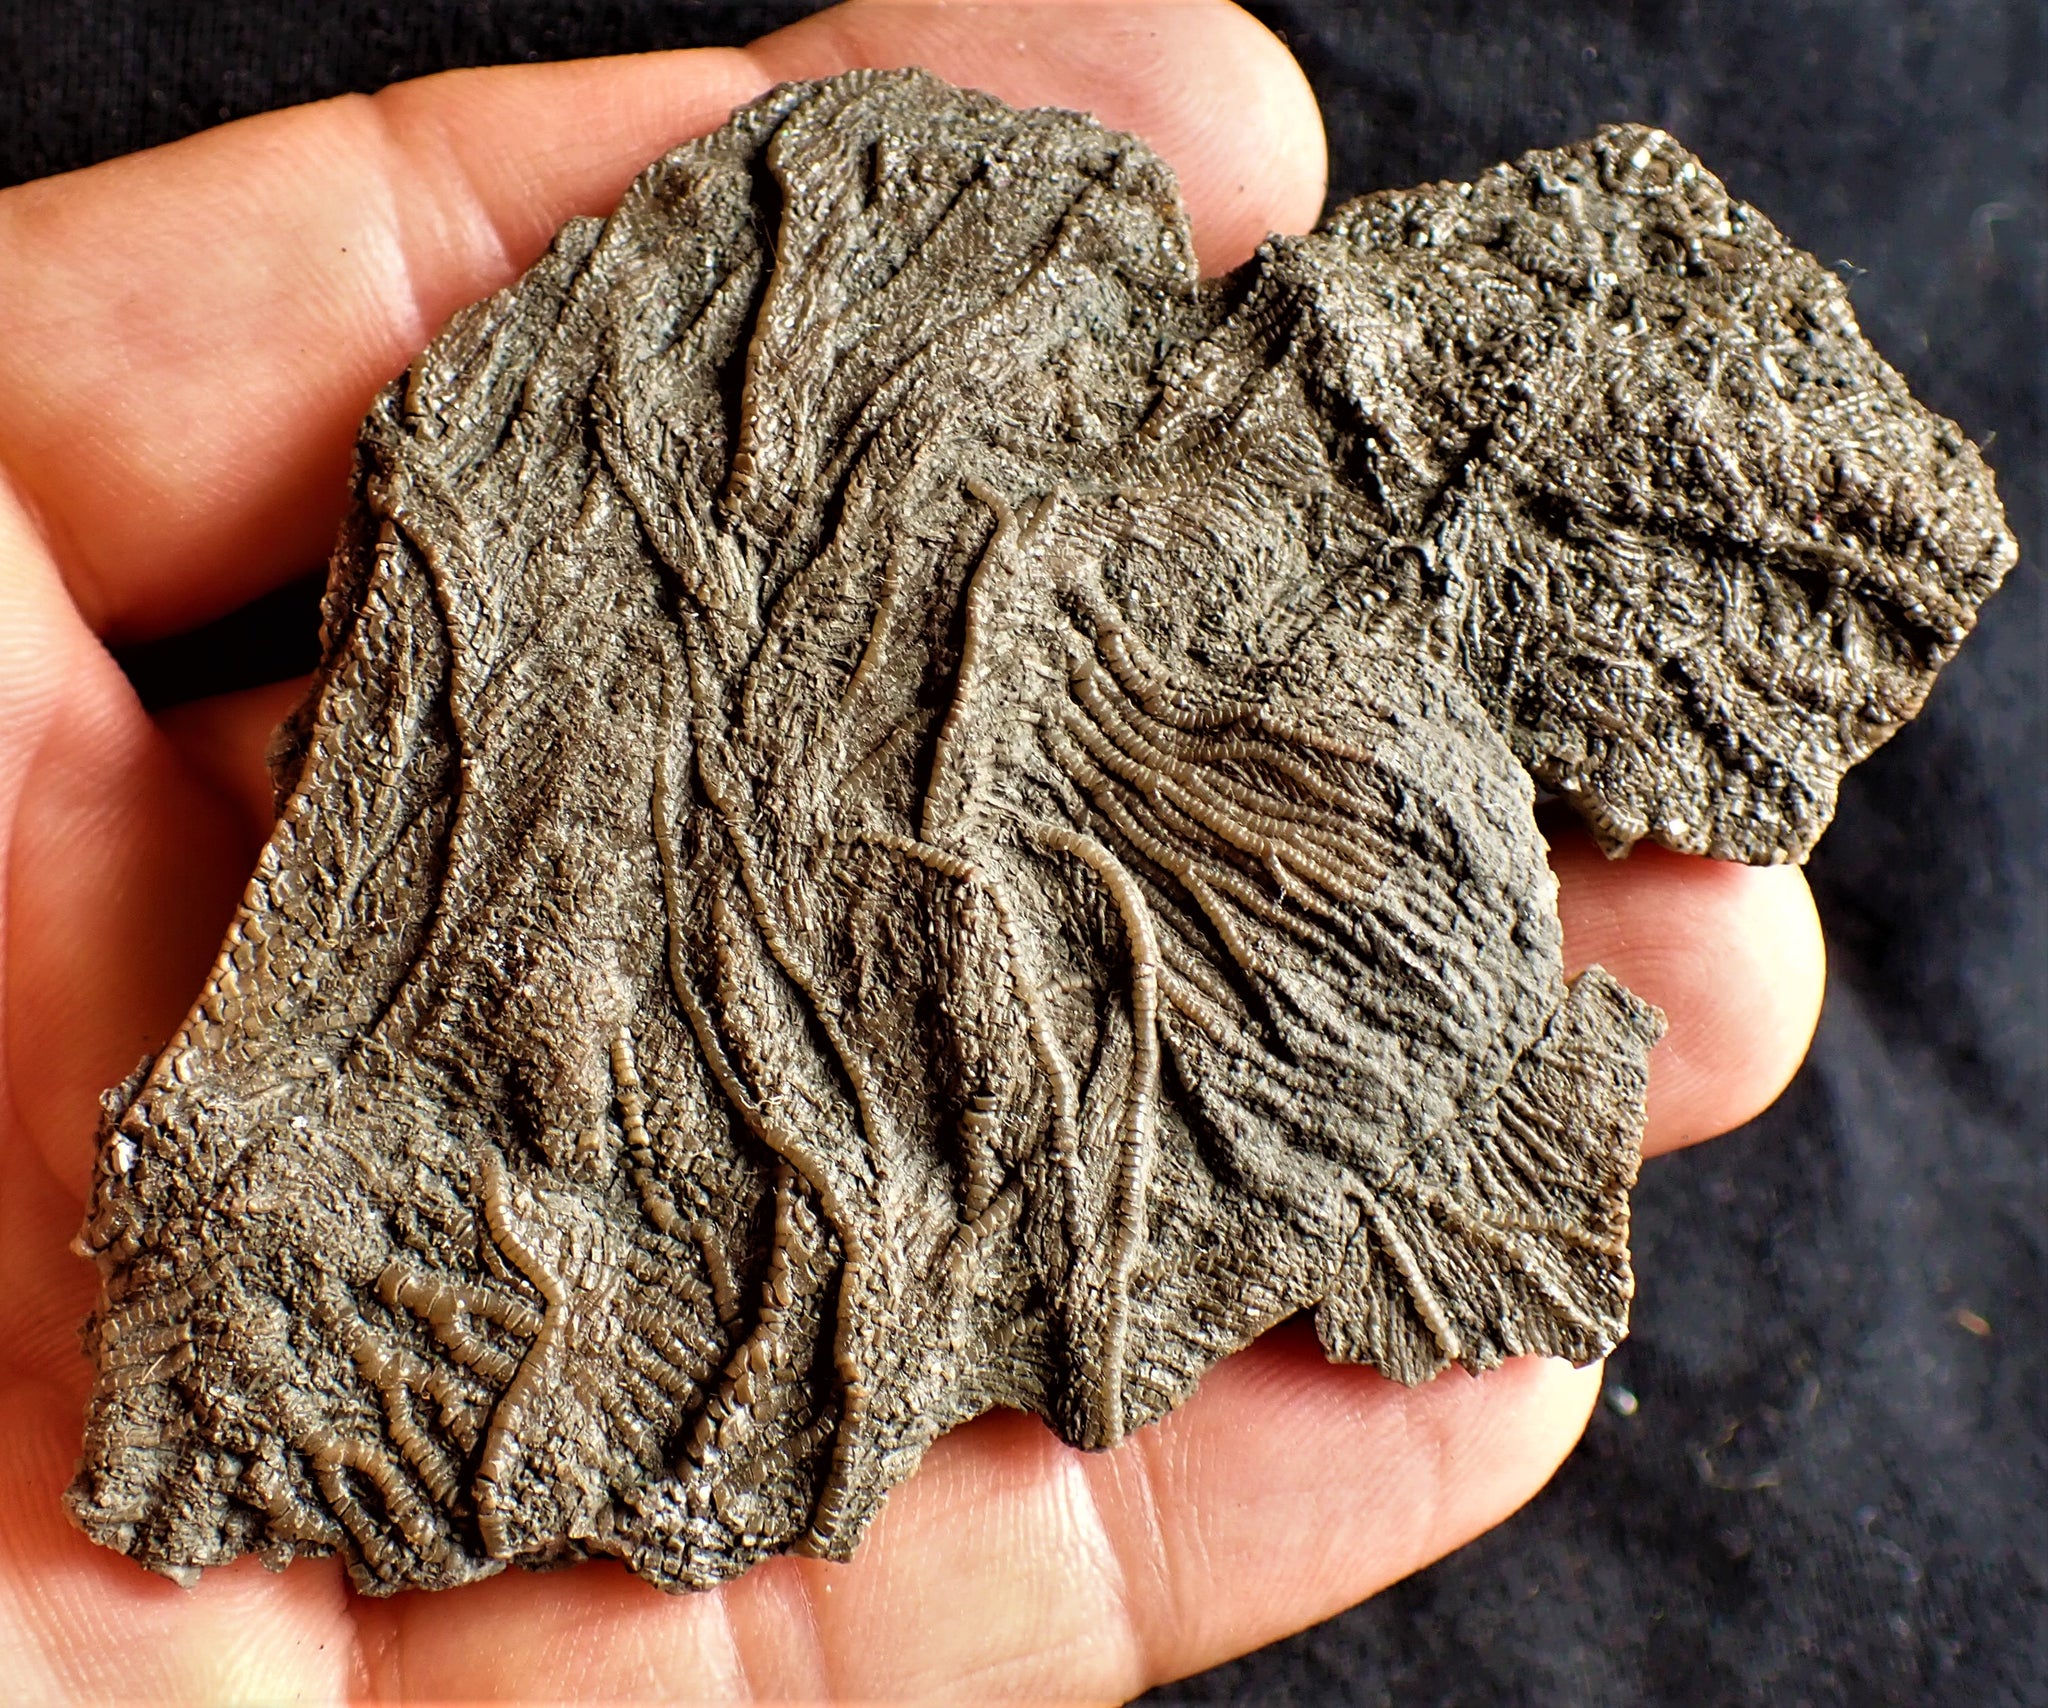 Crinoid fossil with complete detailed heads (95 mm) – Jurassic Coast Fossils